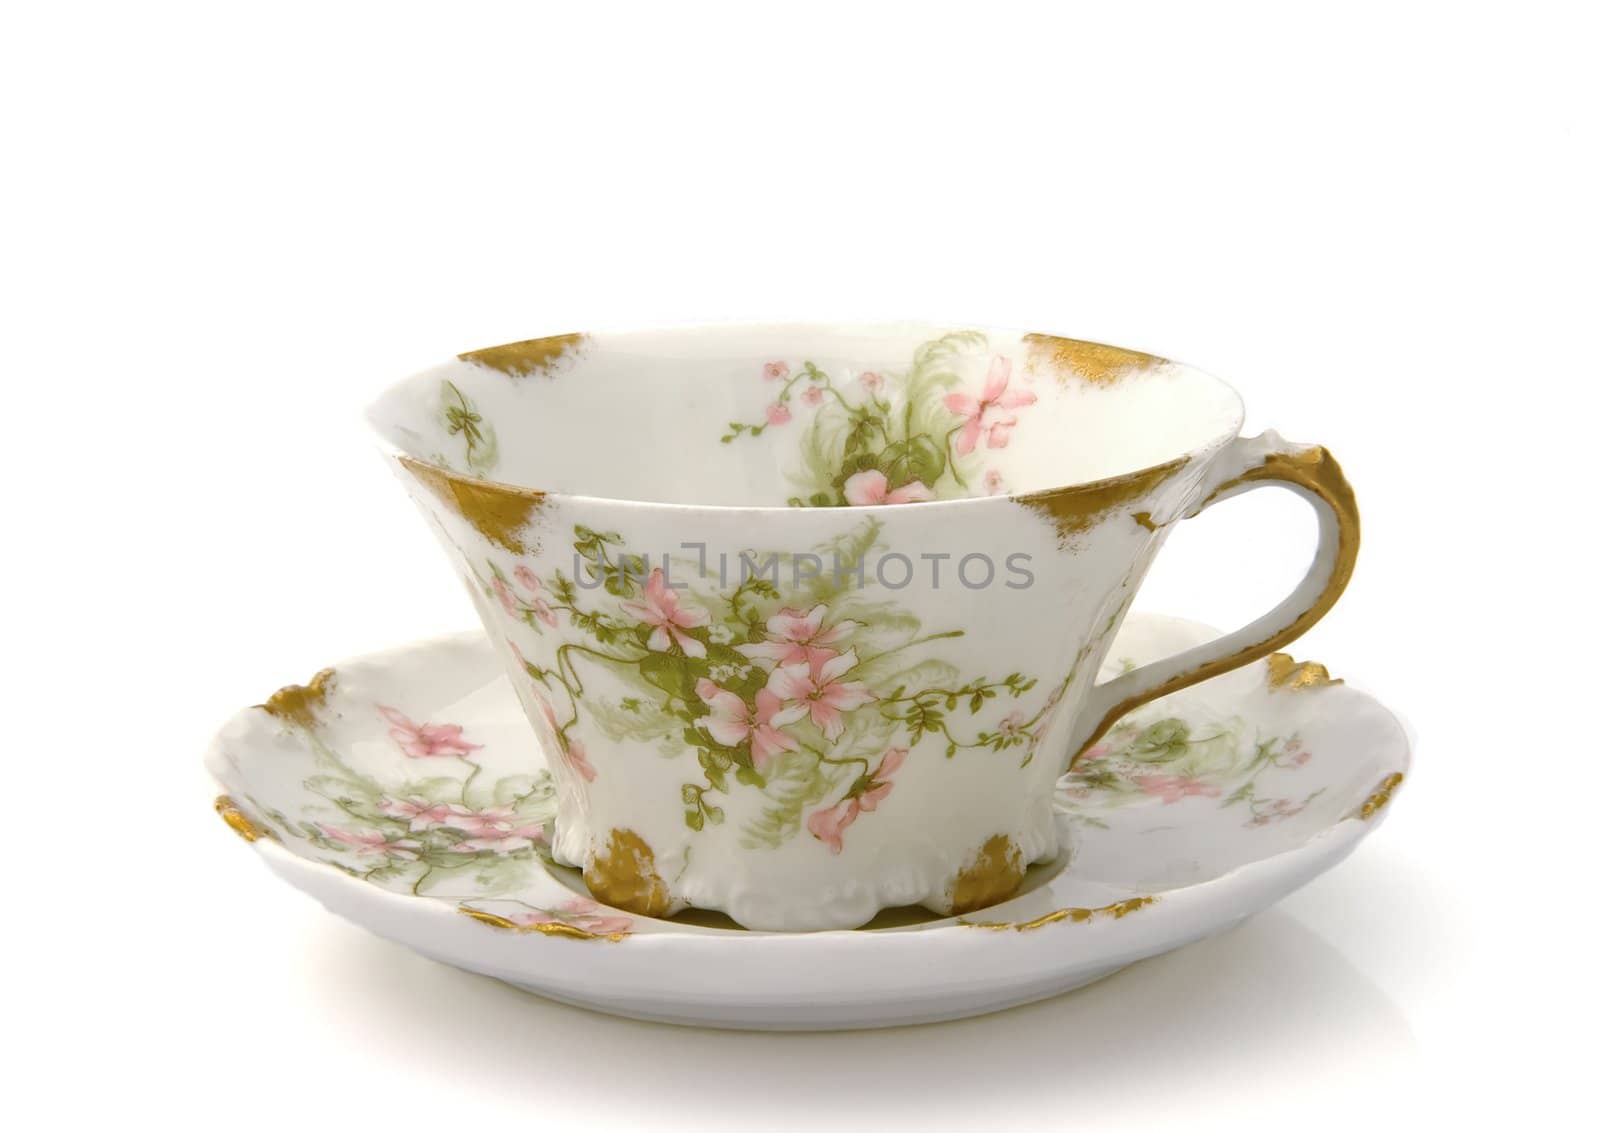 Antique Teacup and Saucer on White by griffre